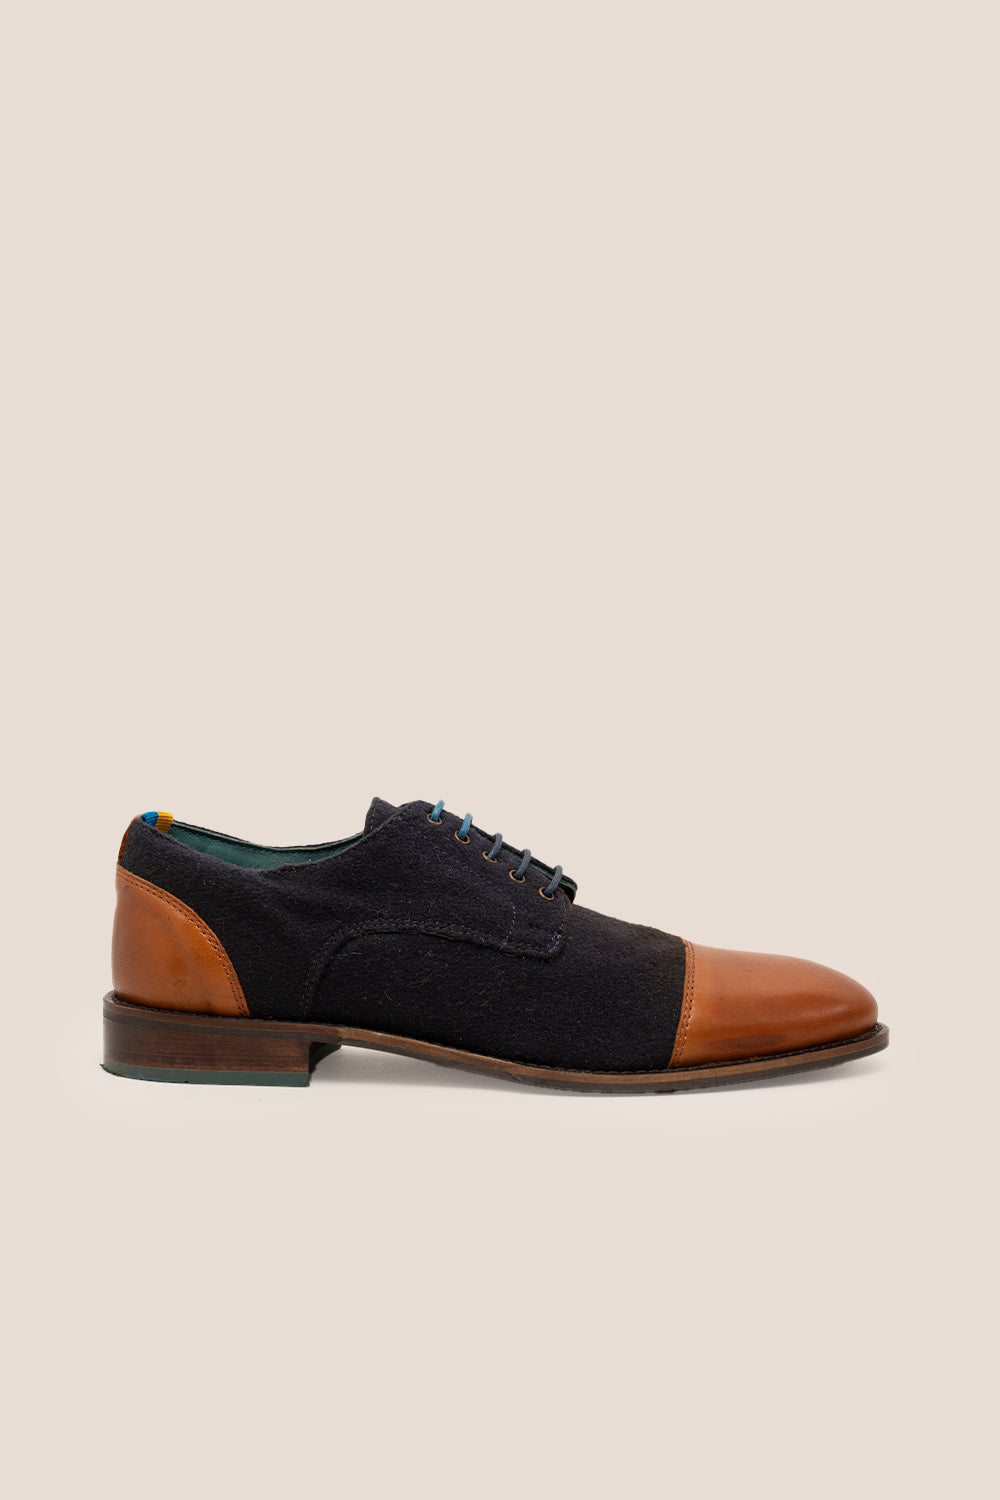 Thomas cognac navy leather and felt mens shoes Oswin Hyde